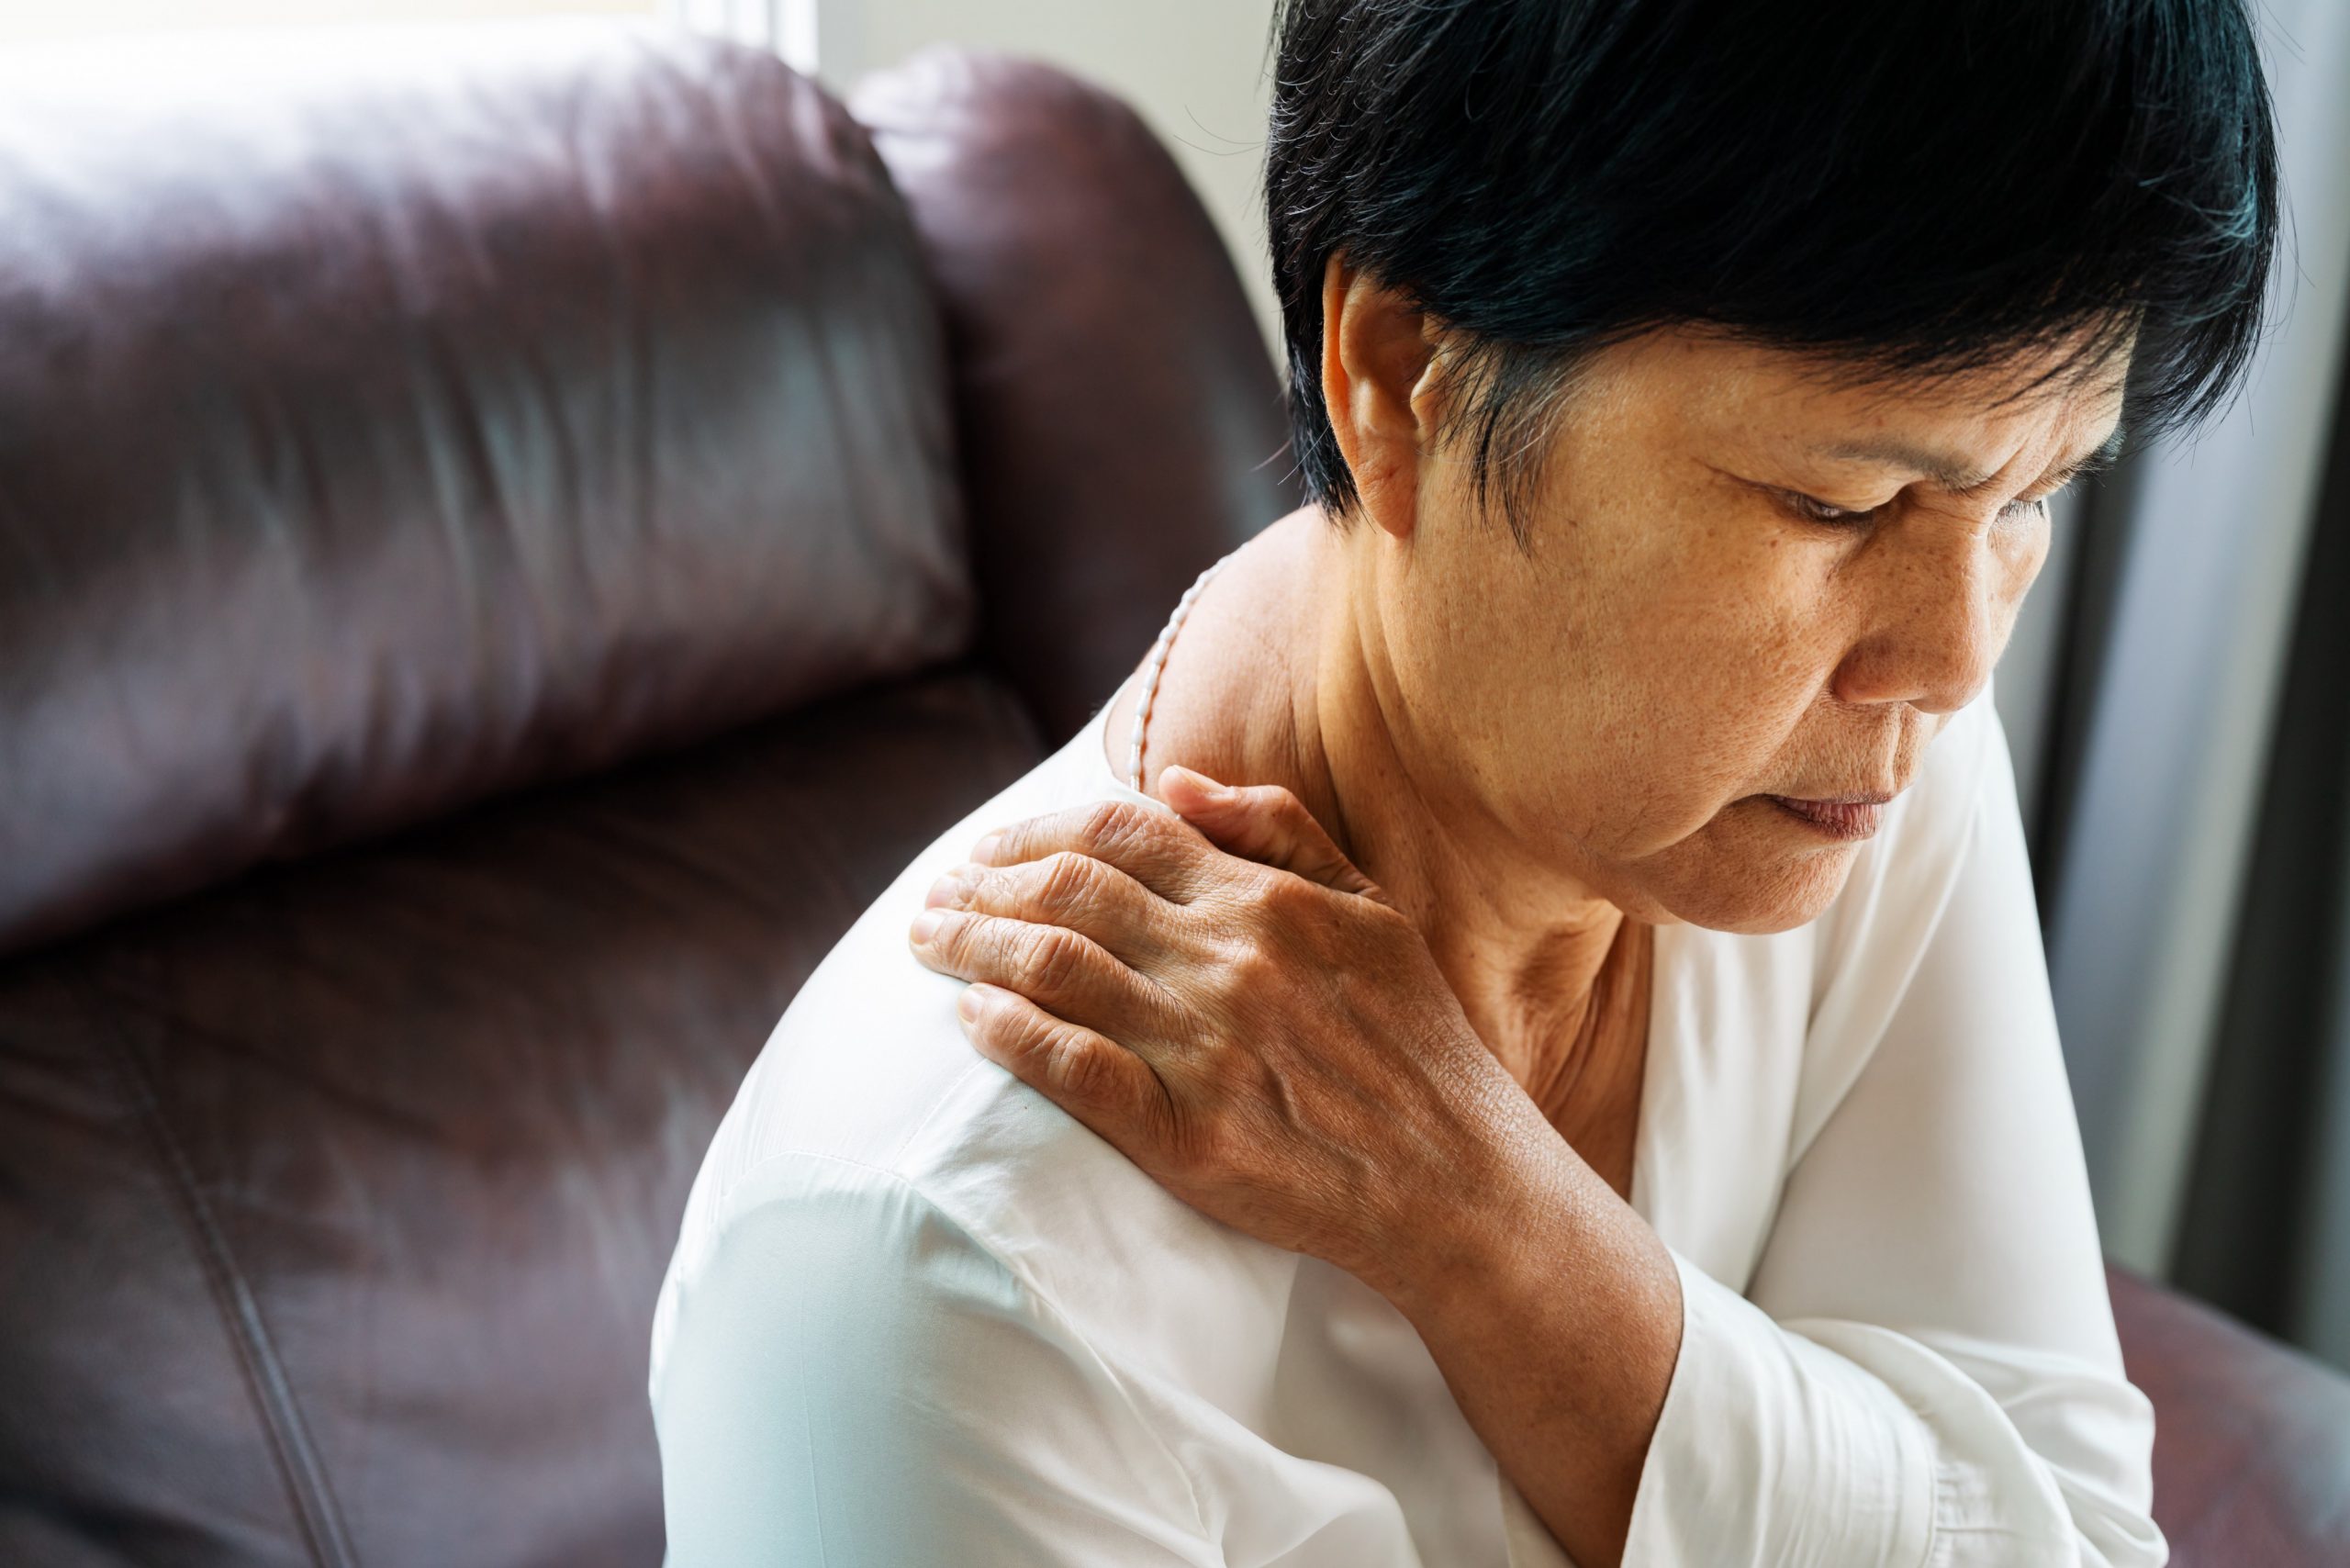 Minimally Invasive Treatment Options to Relieve You From Chronic Pain